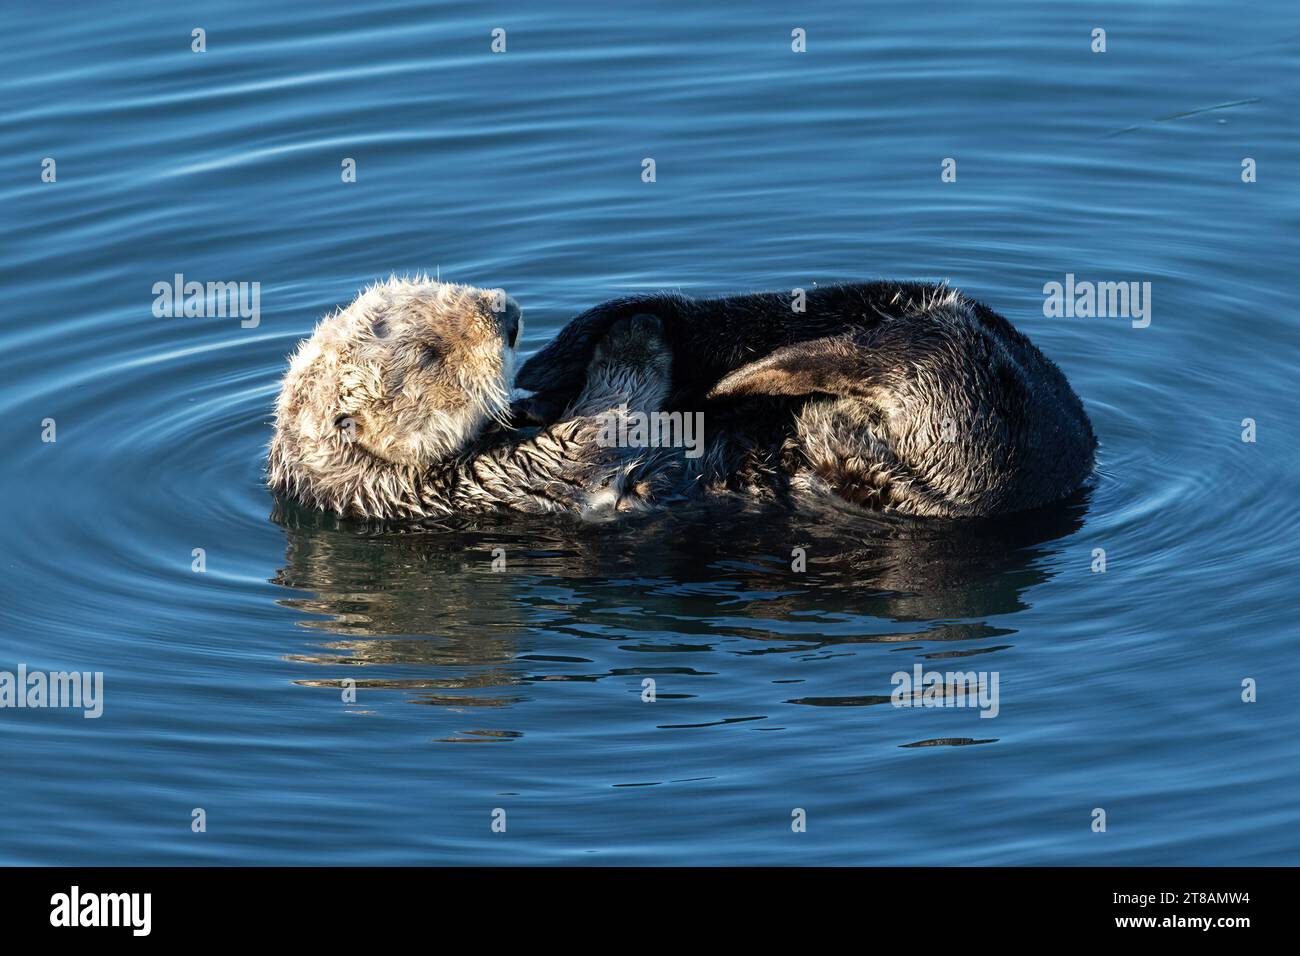 Sea otter (Enhydra lutris) Floating on its back, in Morro Bay, California. Stock Photo